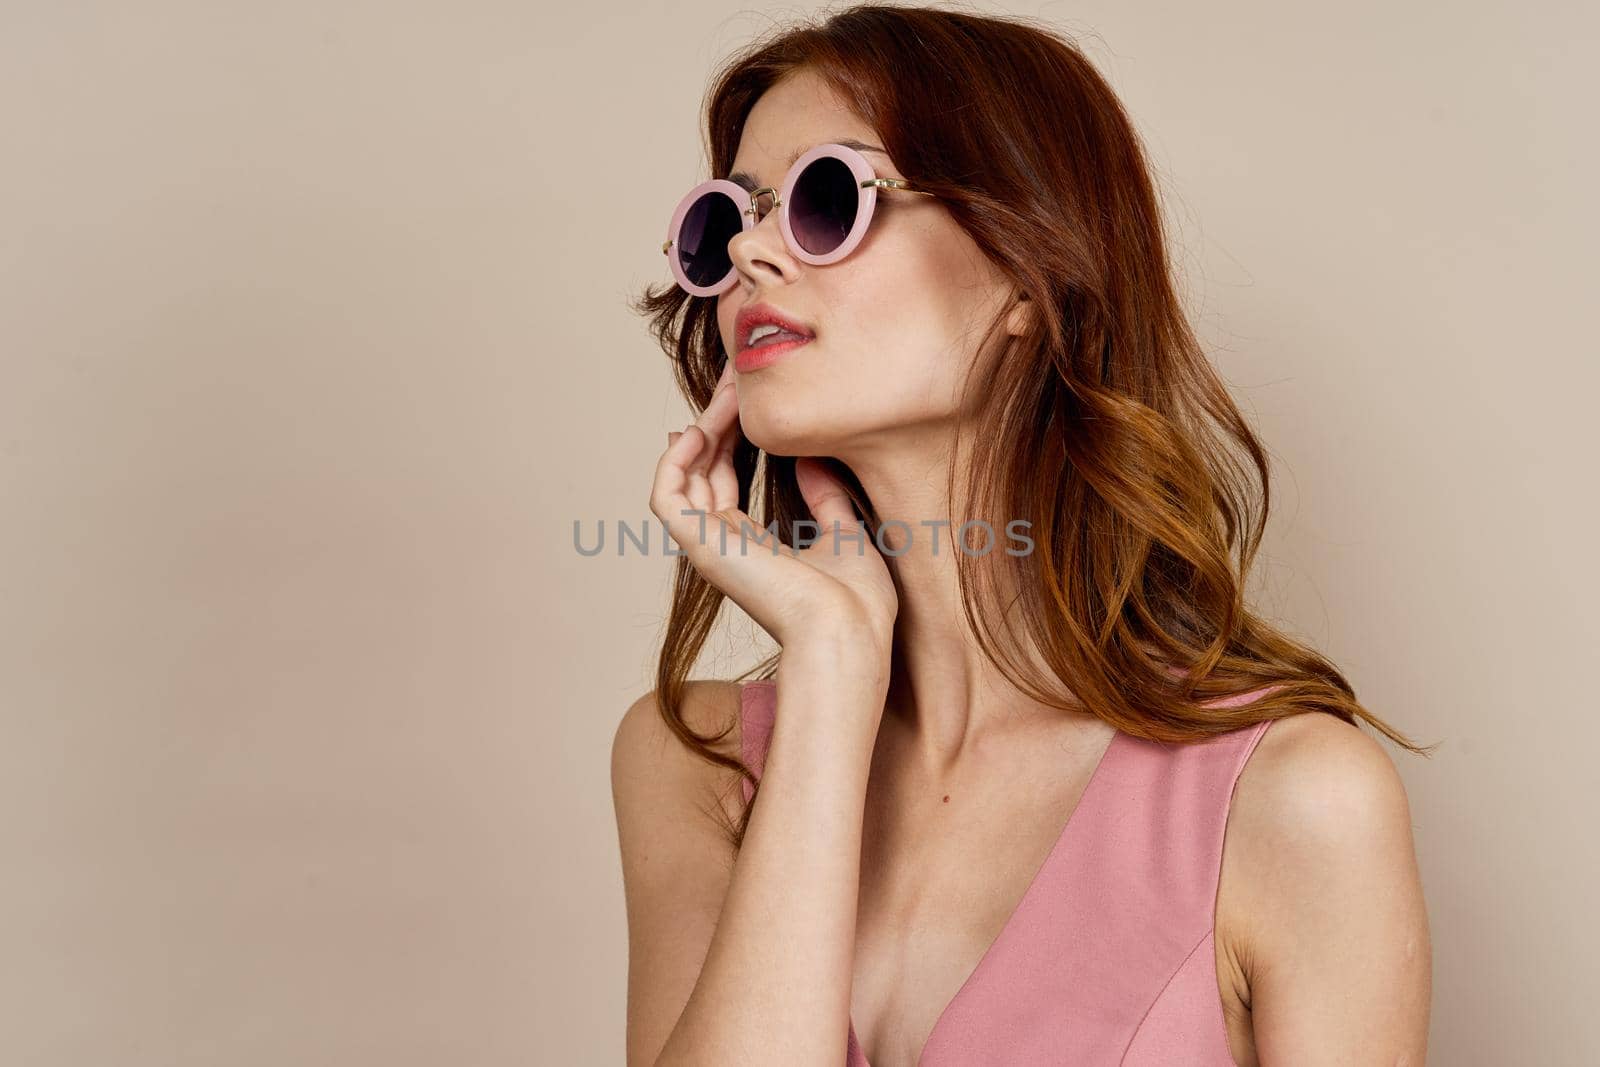 pretty woman in pink dress decoration posing model. High quality photo